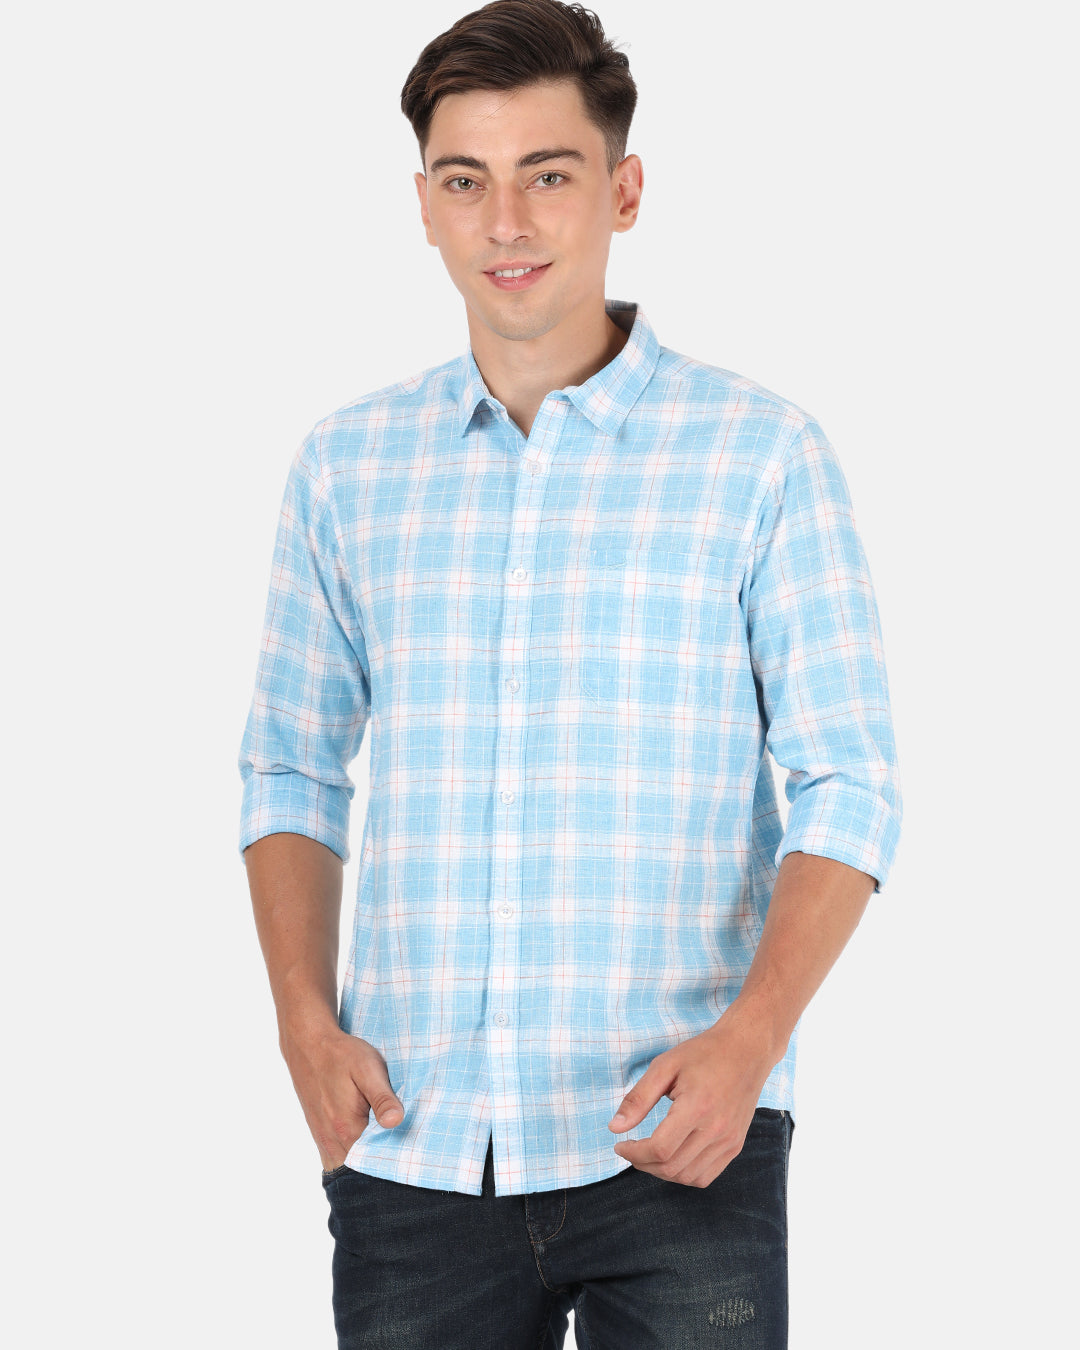 Crocodile Casual Full Sleeve Comfort Fit Checks Light Blue with Collar Shirt for Men